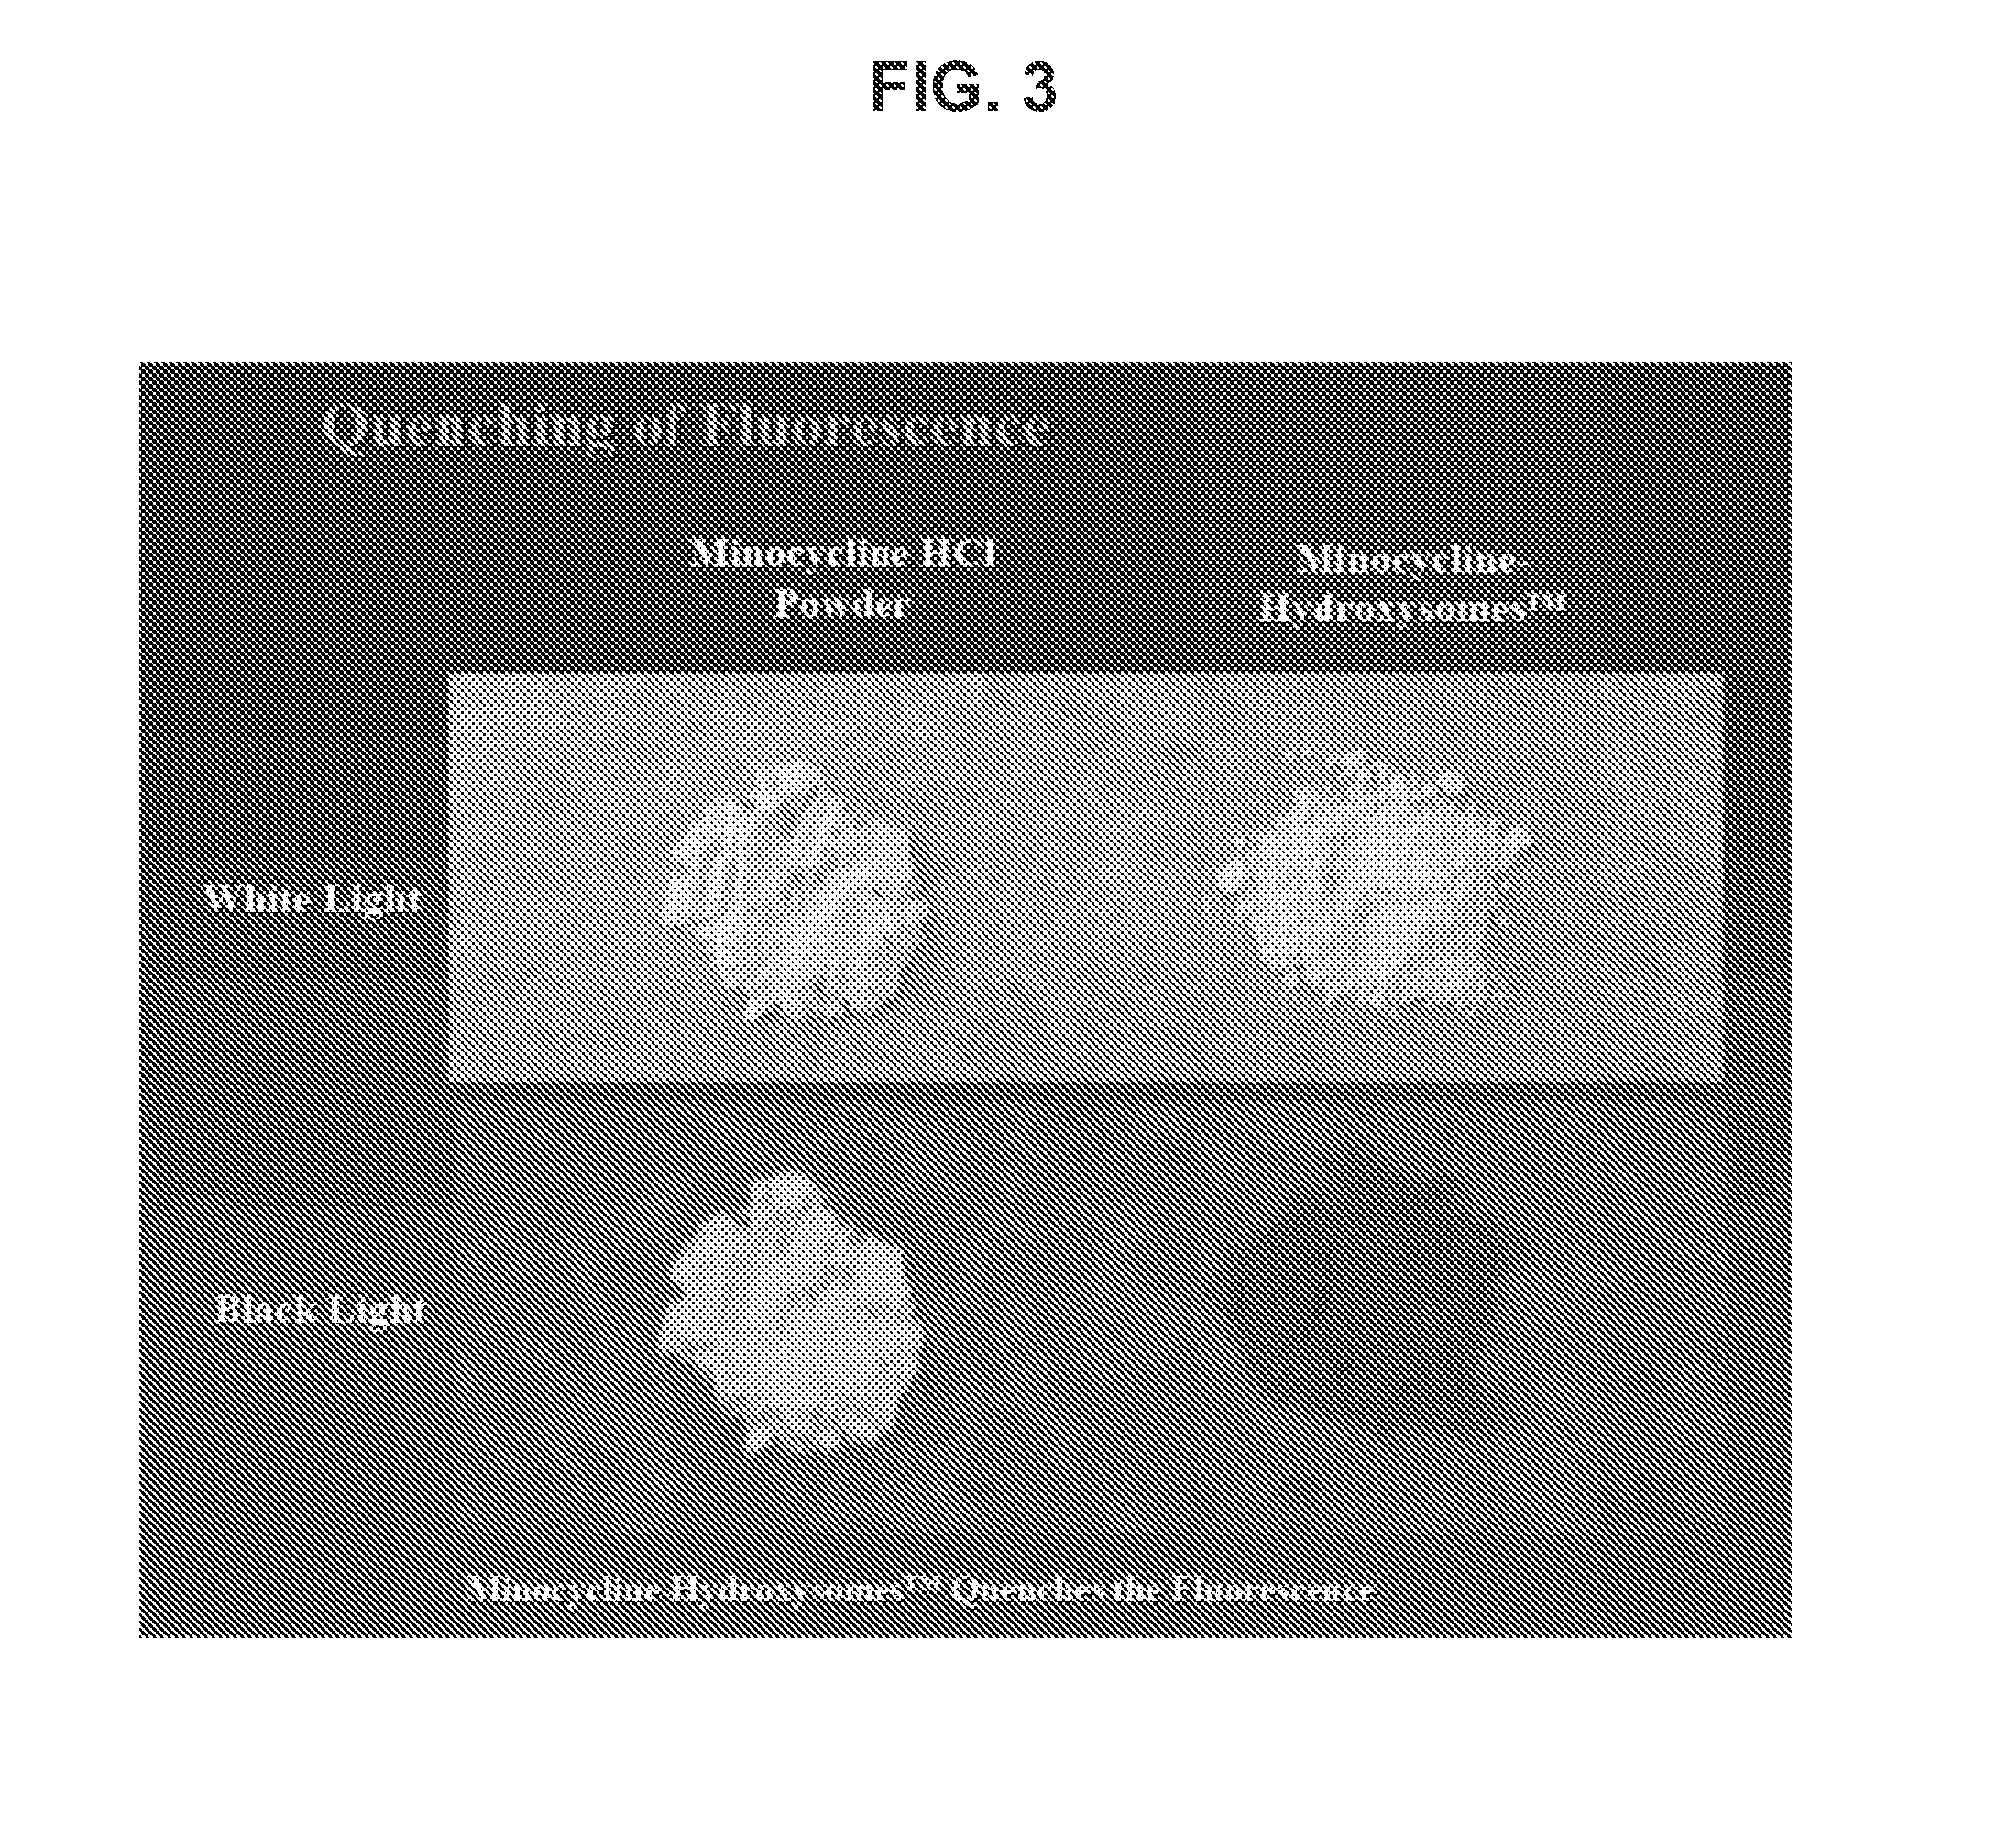 Topical Minocycline Compositions and Methods of Using the Same